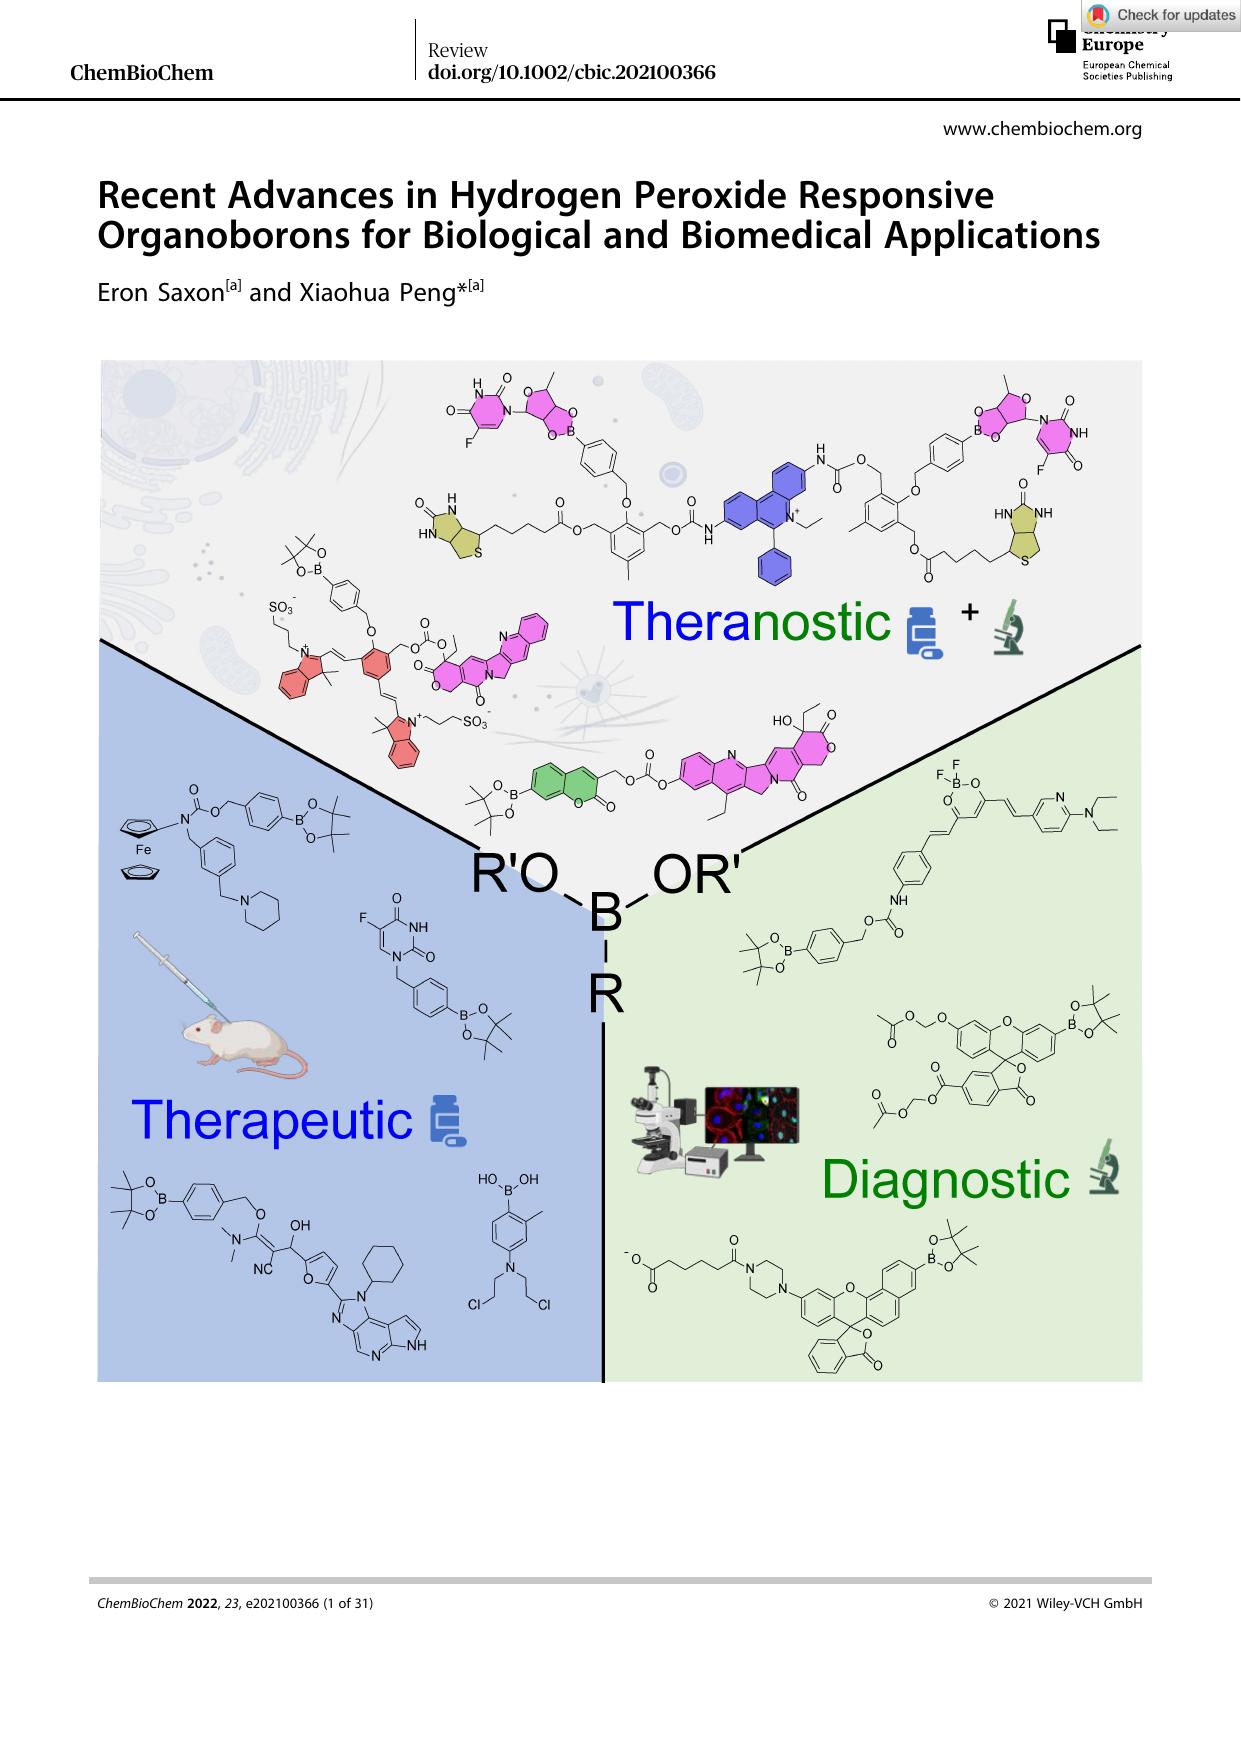 Recent Advances in Hydrogen Peroxide Responsive Organoborons for Biological and Biomedical Applications by Unknown